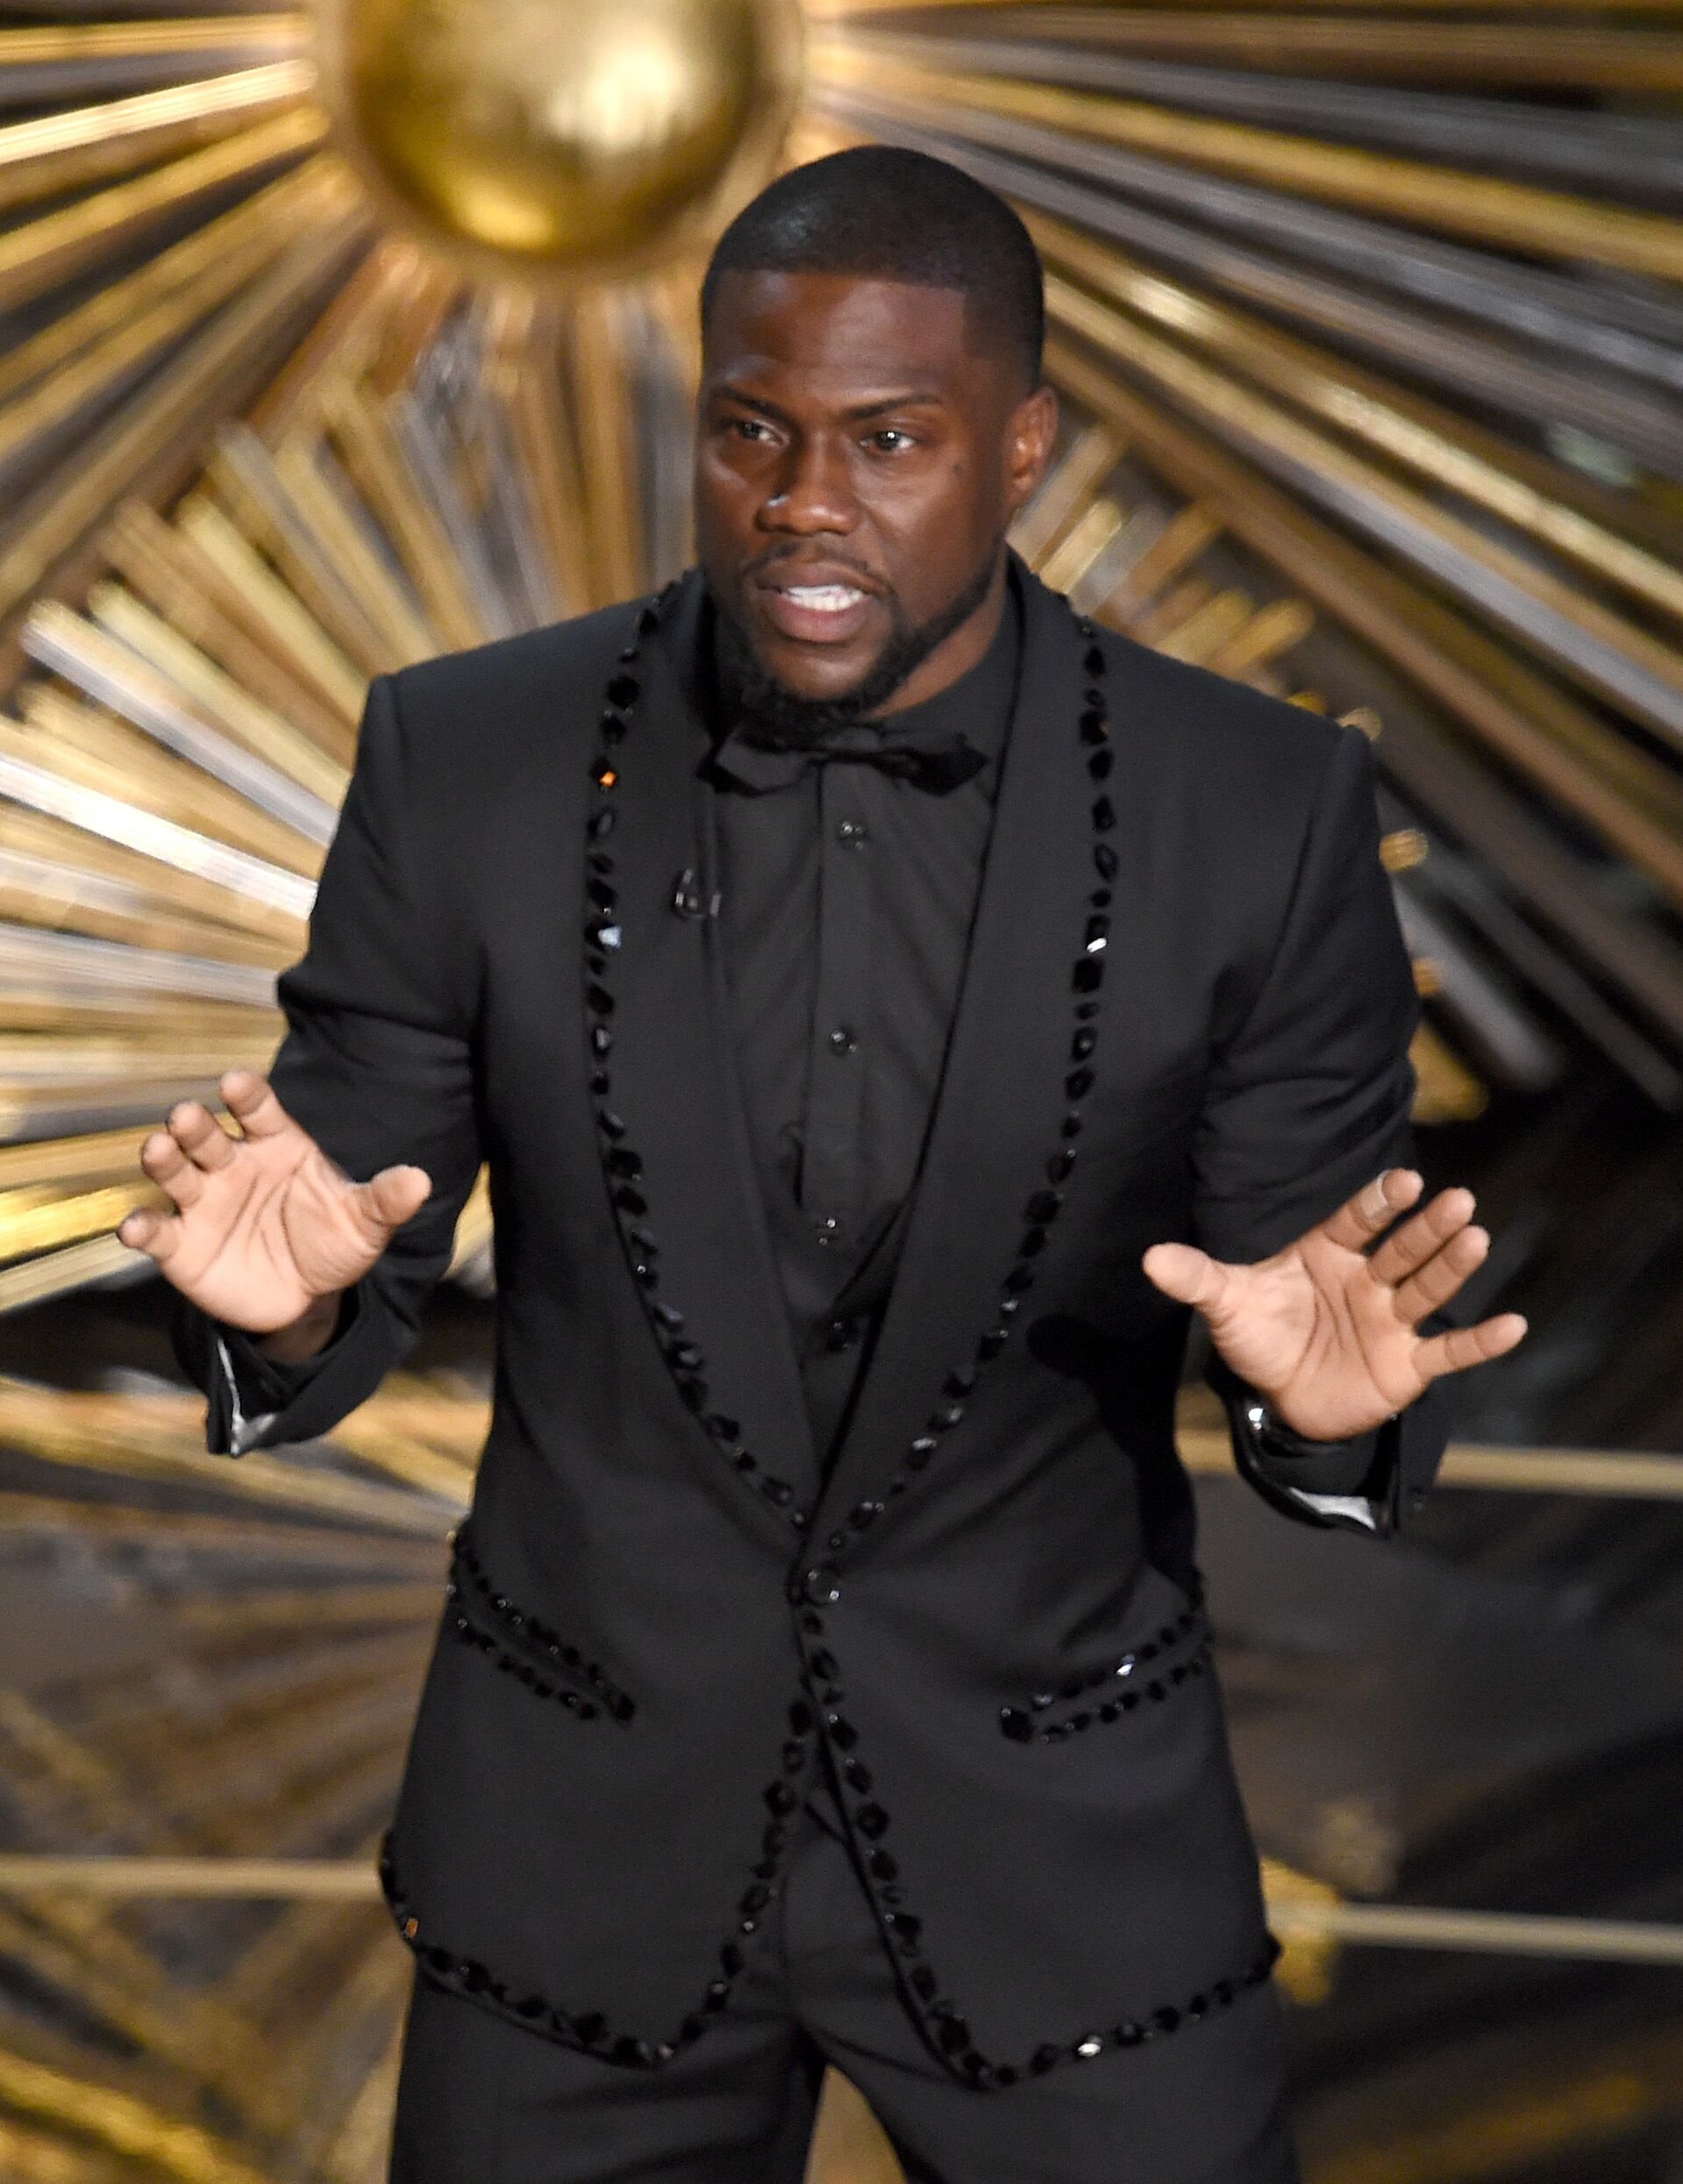 Kevin Hart hosting an awards night onstage | Source: Getty Images/GlobalImagesUkraine